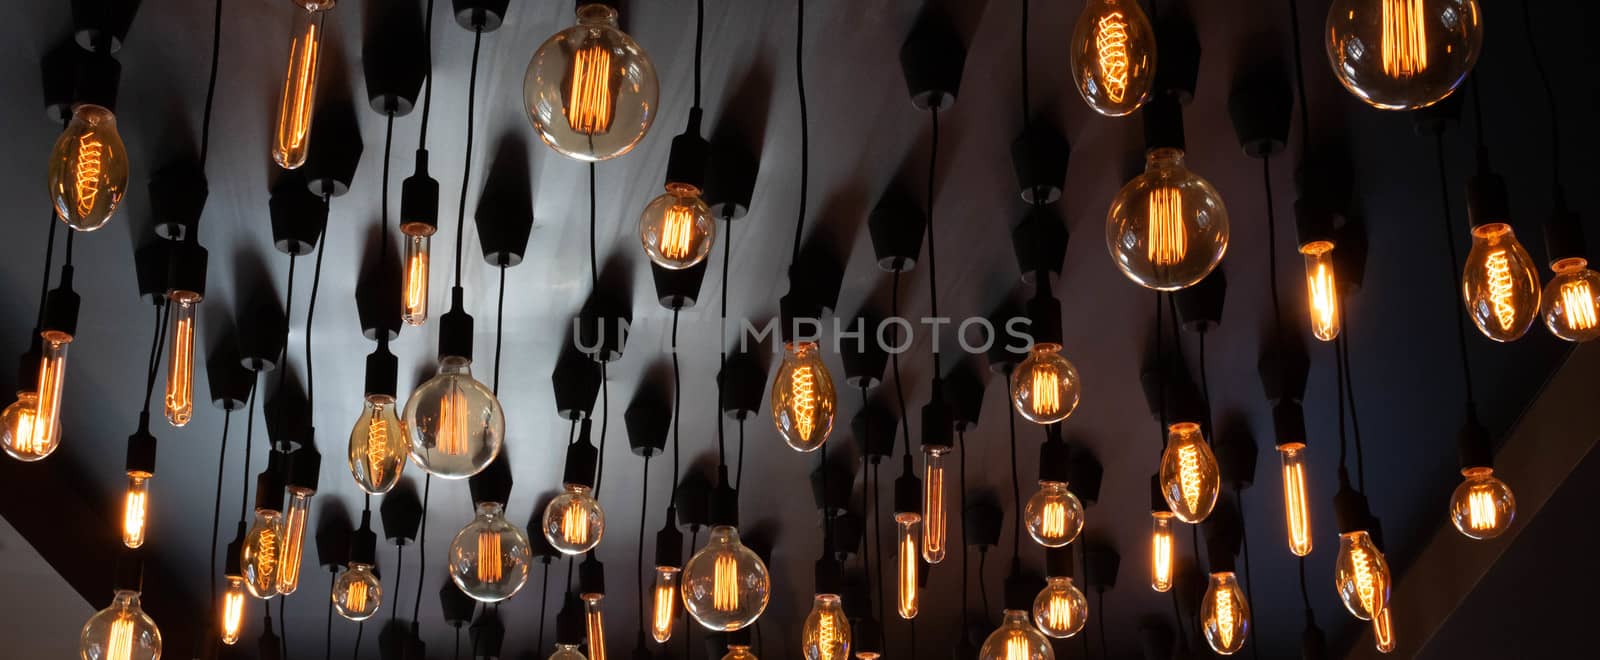 Retro Edison lamp on a black background of the ceiling. Concept idea.